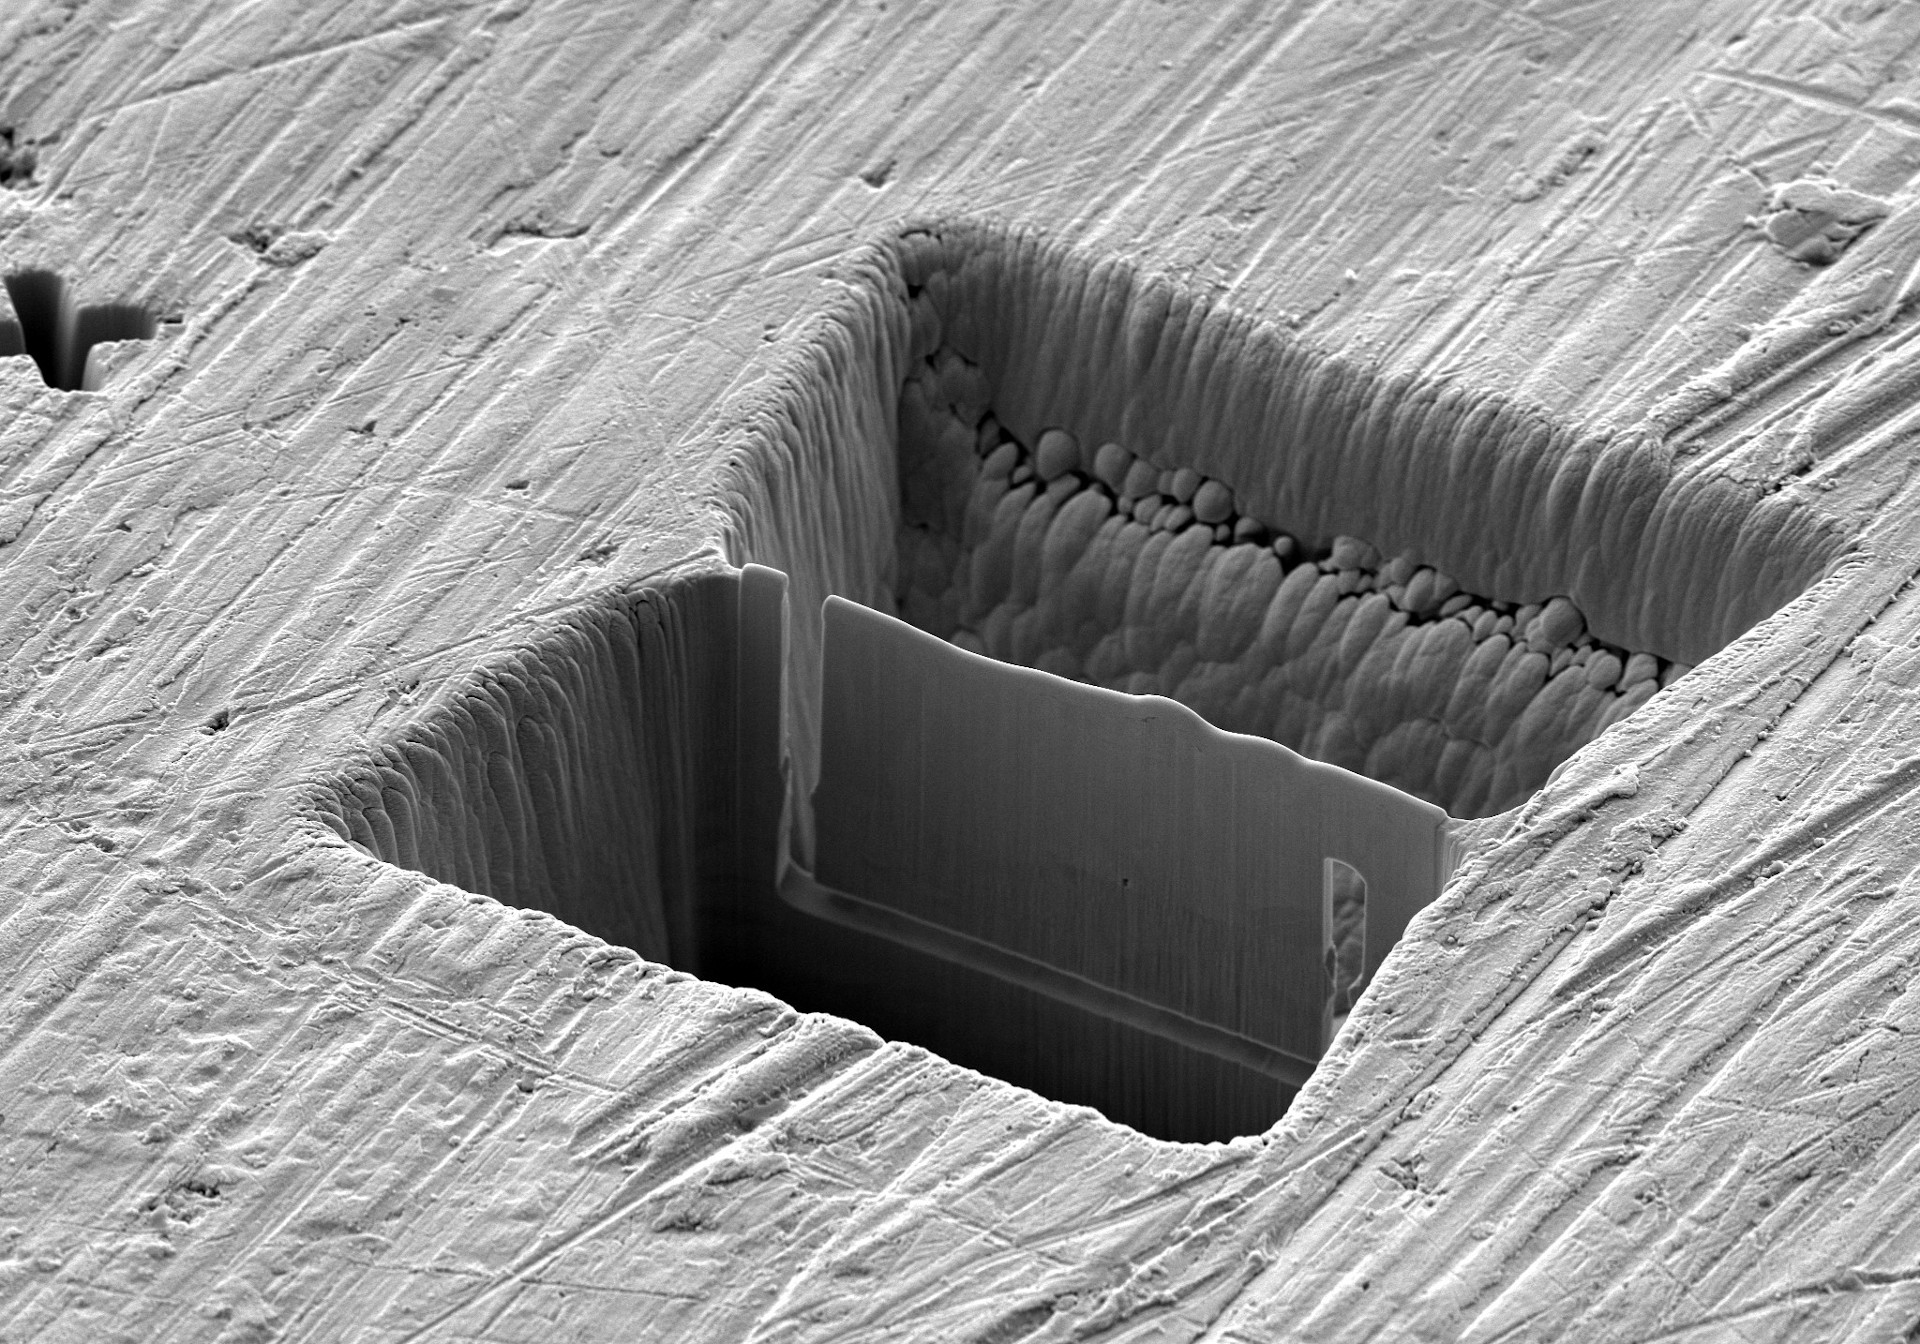 Multi-site lamella preparation of a 3 x 2 array of laser- machined chunks followed by FIB millingfor precise thinning to produce a < 2 µm TEM lamella.